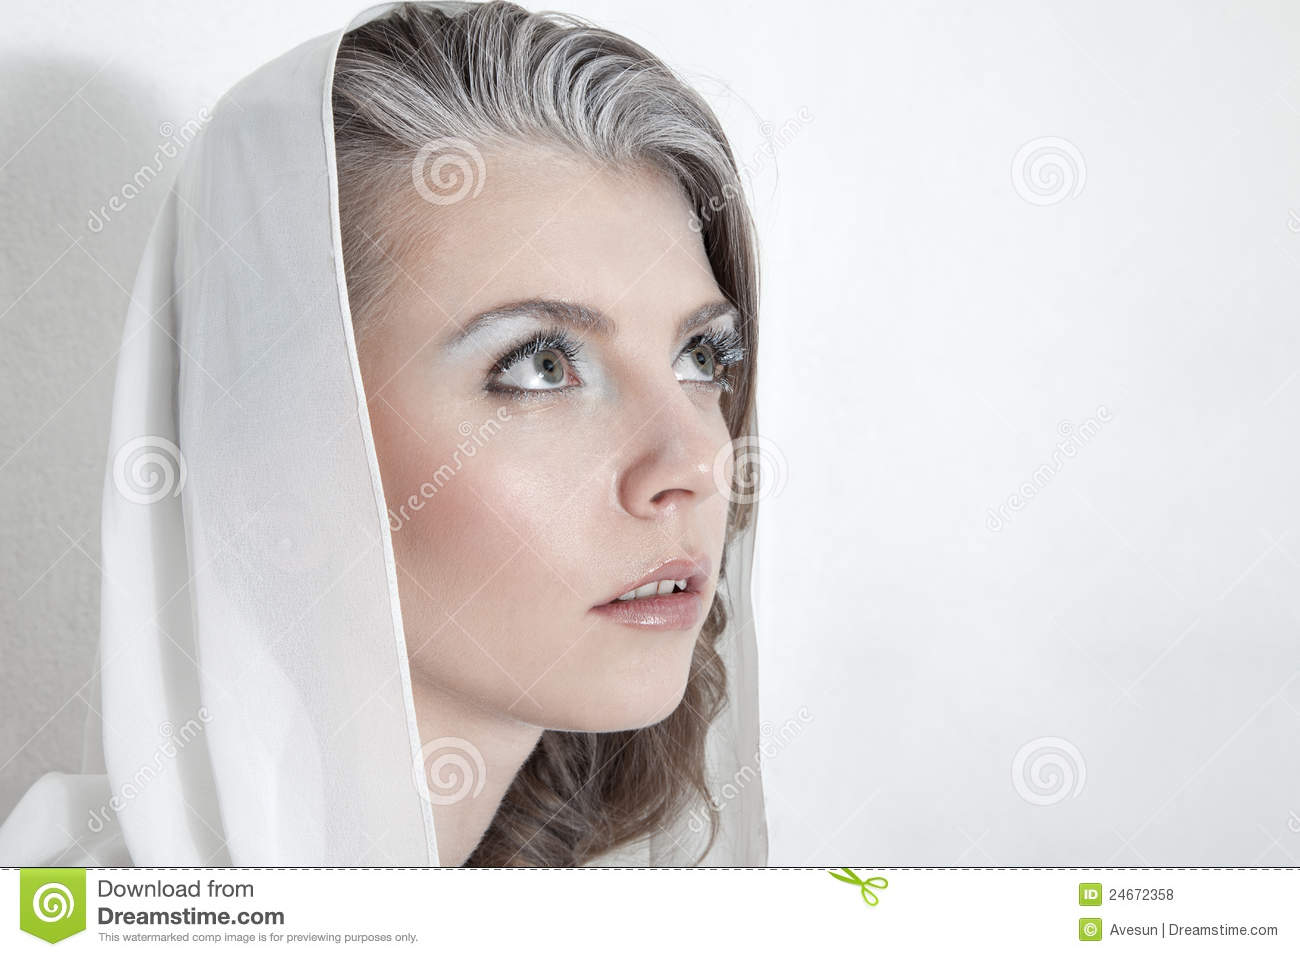 Woman With Snow Make Up Royalty Free Stock Photos   Image  24672358